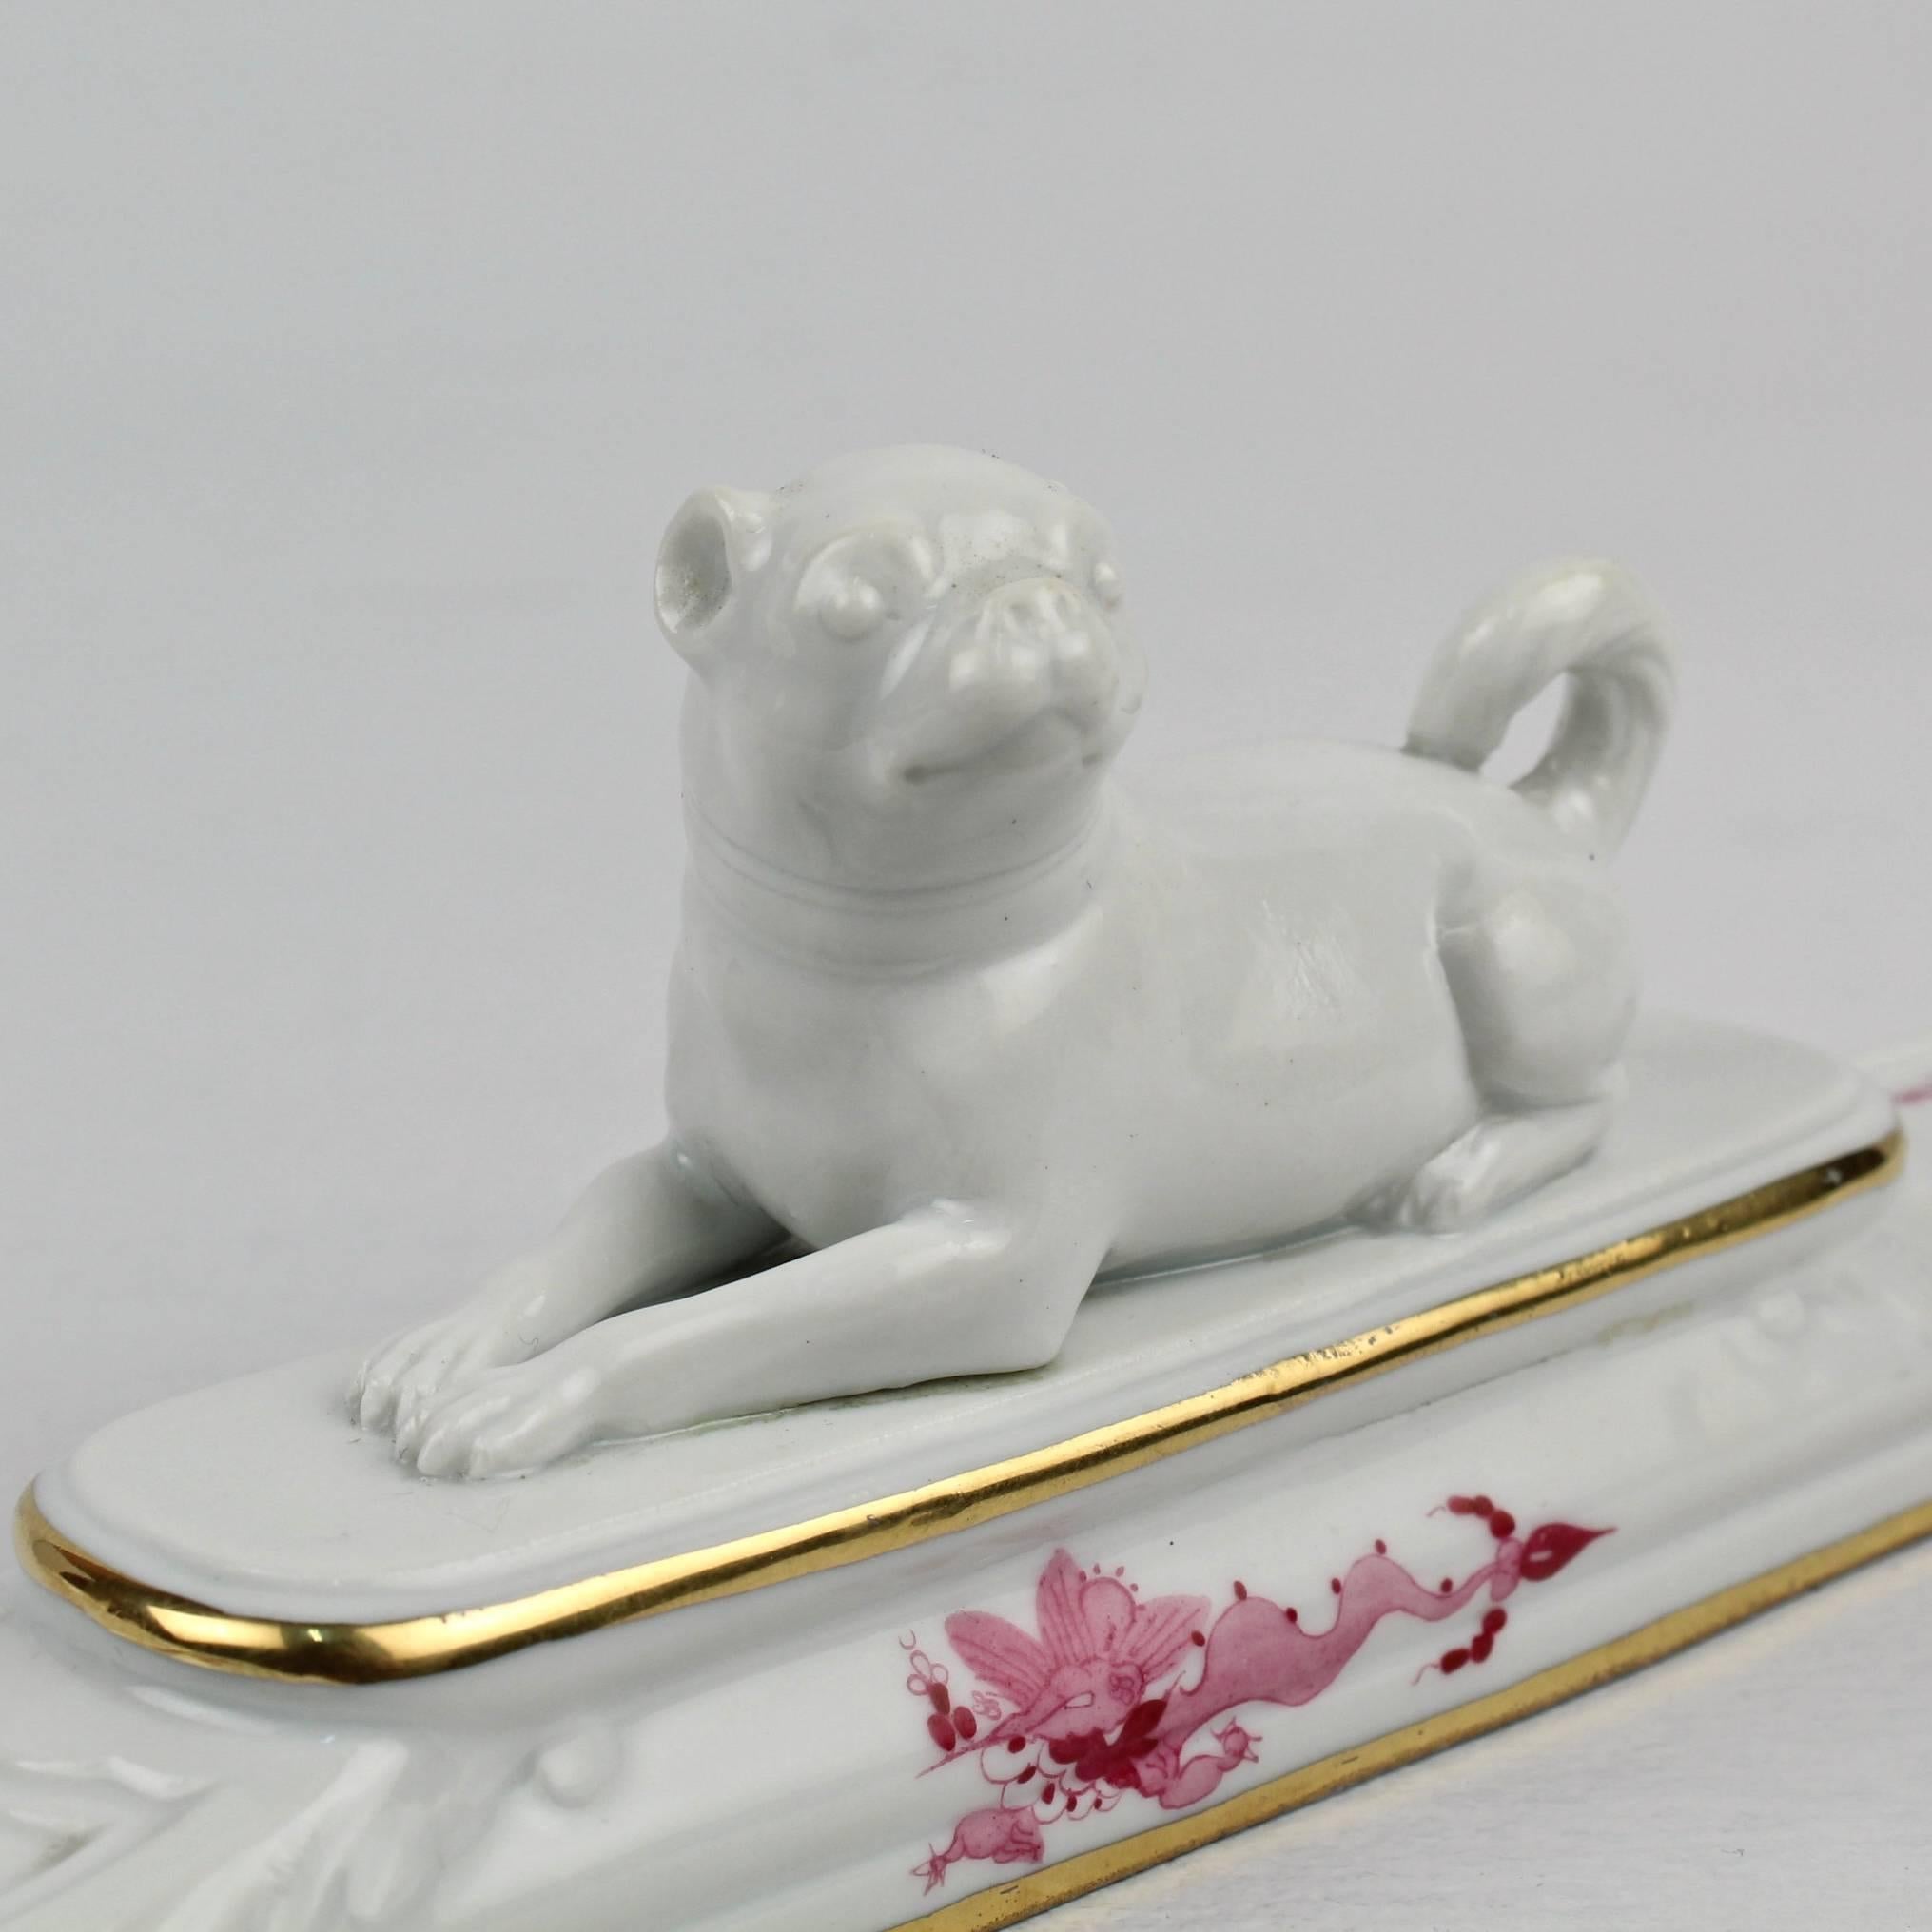 A Meissen porcelain paperweight with a full figural pug dog finial.

Decorated in the pink variant of the 